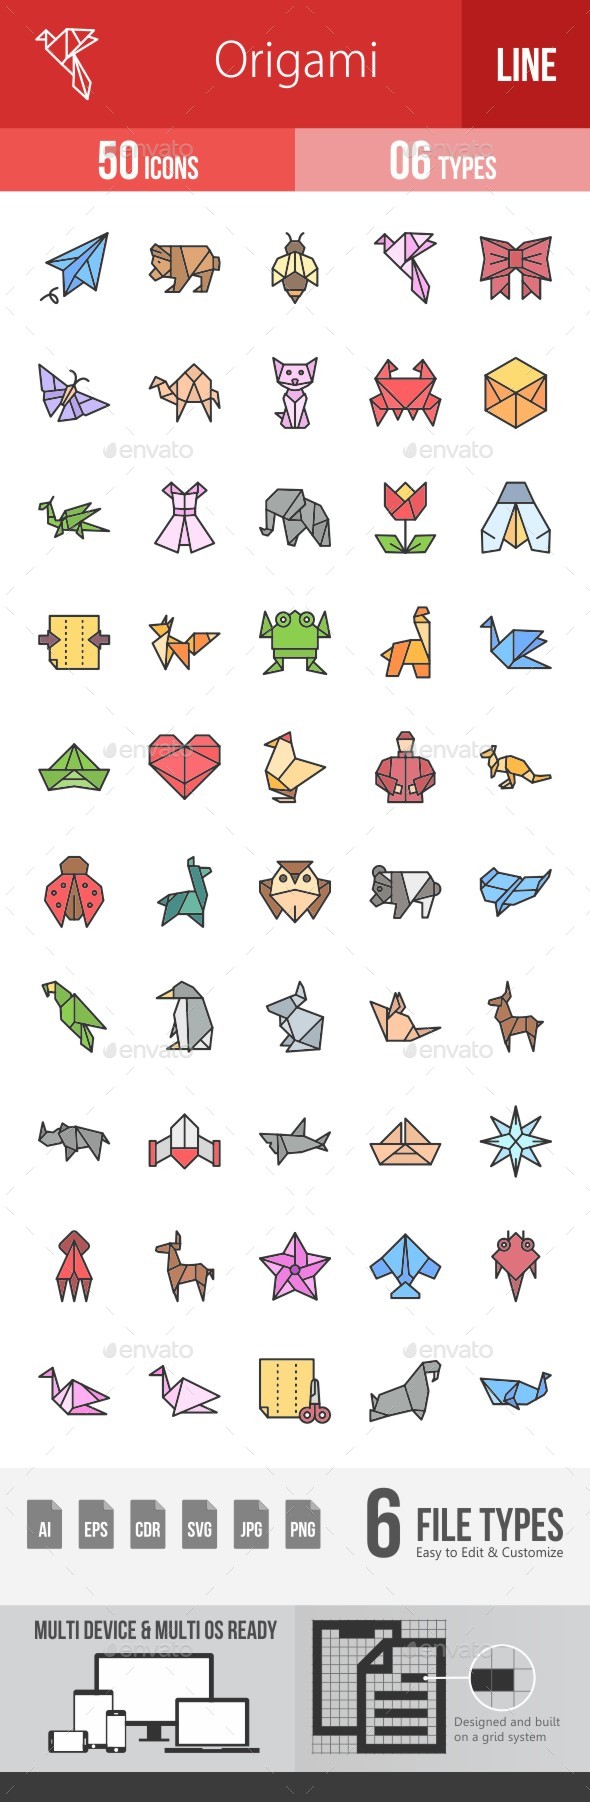 [DOWNLOAD]Origami Filled Line Icons